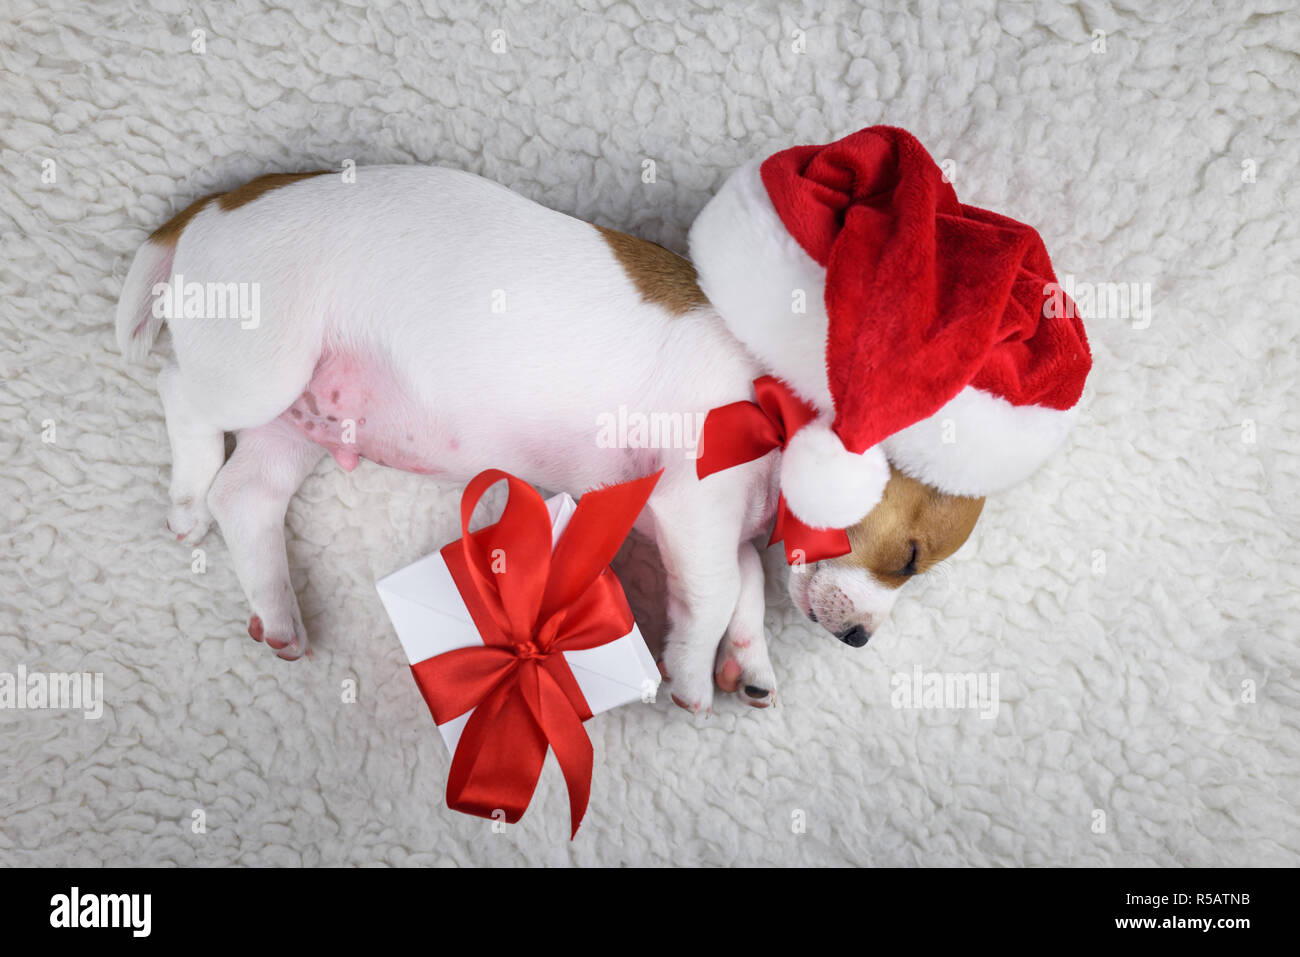 Premium Photo  A puppy in a gift box with a red bow.